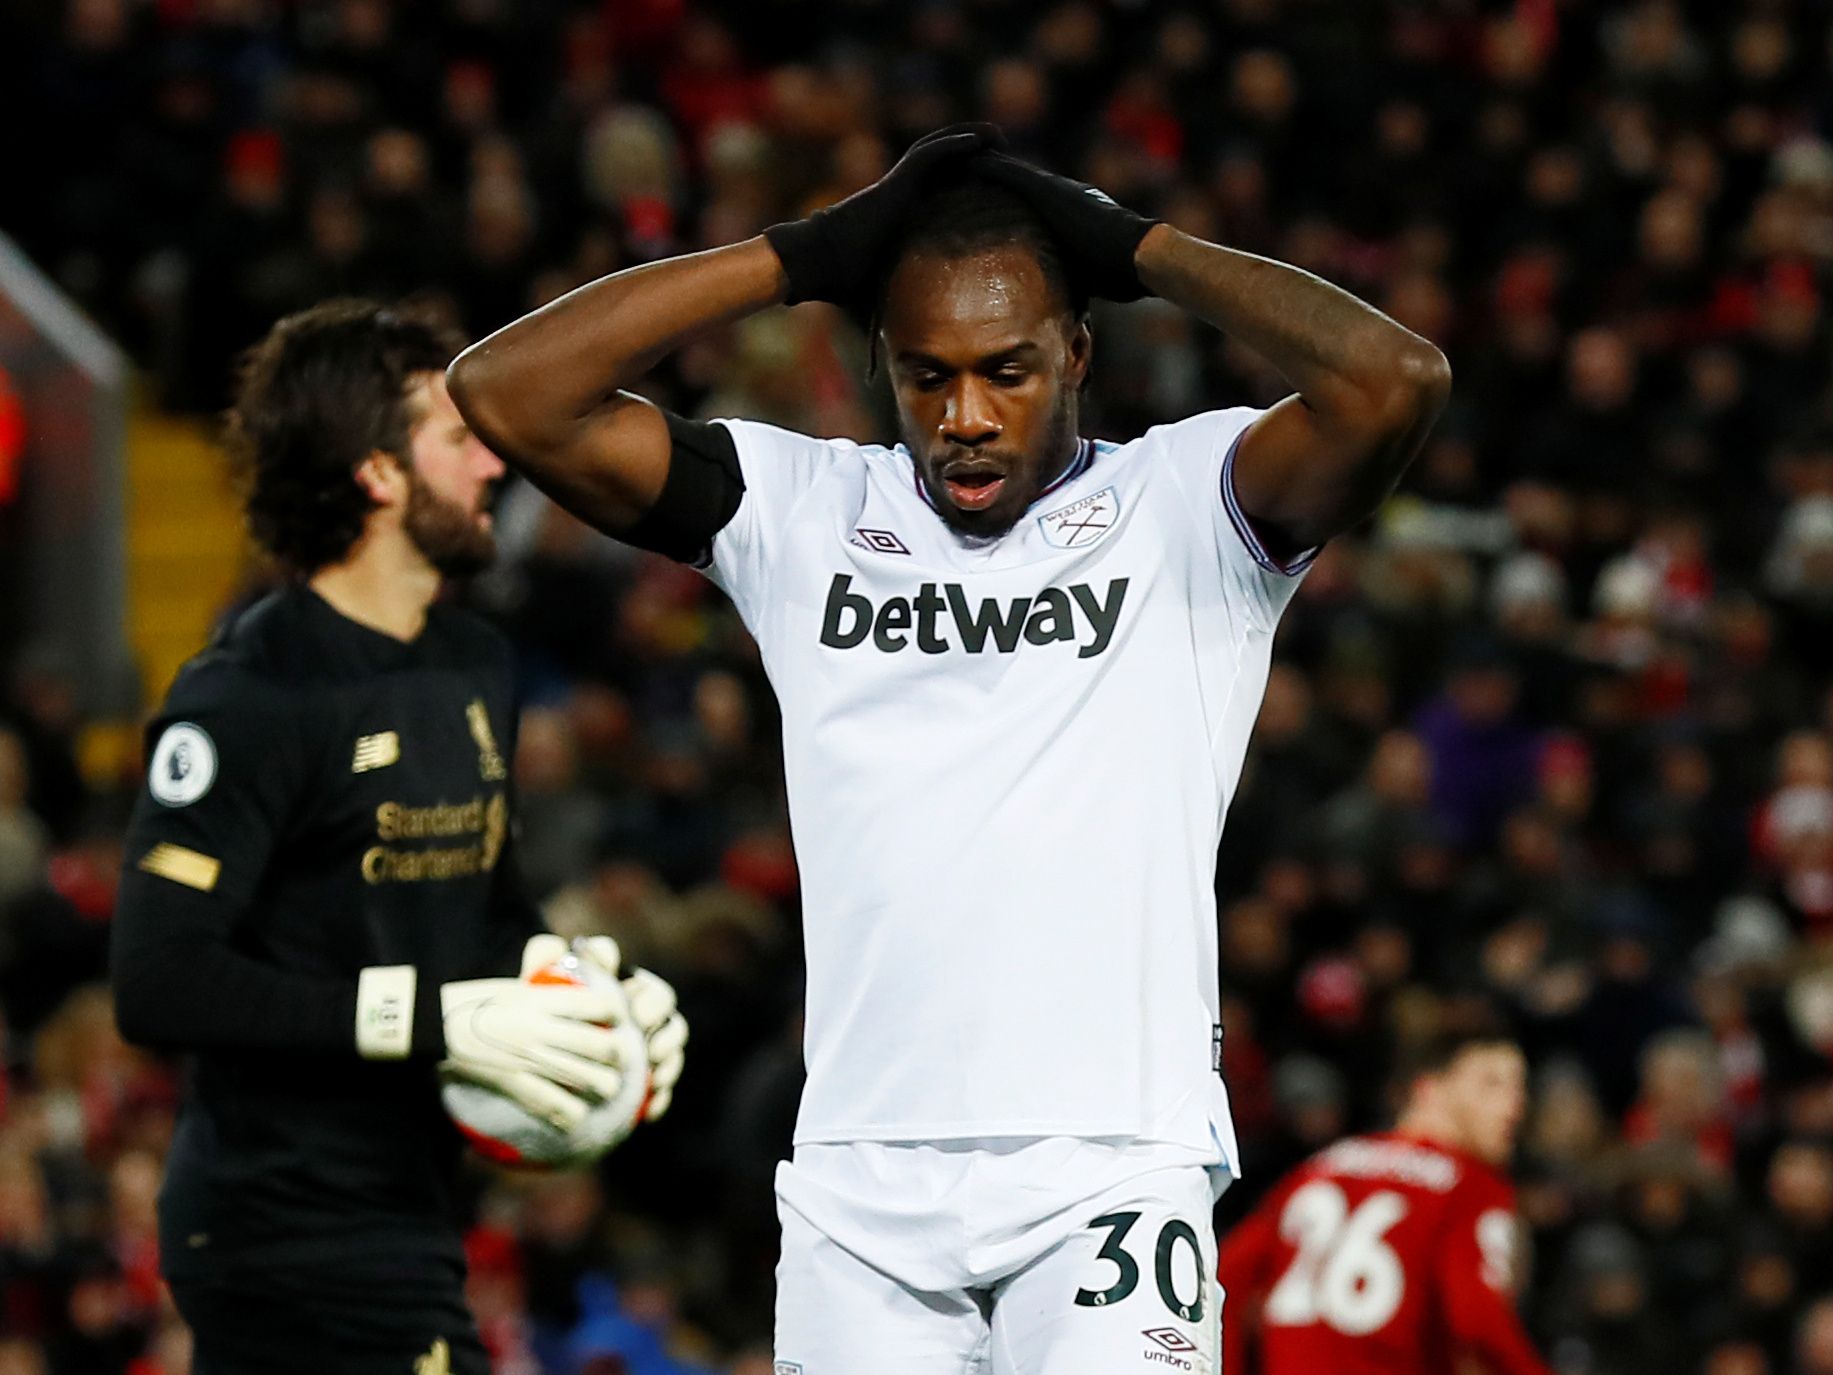 Soccer Football - Premier League - Liverpool v West Ham United - Anfield, Liverpool, Britain - February 24, 2020  West Ham United's Michail Antonio reacts after a missed chance  Action Images via Reuters/Jason Cairnduff  EDITORIAL USE ONLY. No use with unauthorized audio, video, data, fixture lists, club/league logos or "live" services. Online in-match use limited to 75 images, no video emulation. No use in betting, games or single club/league/player publications.  Please contact your account re